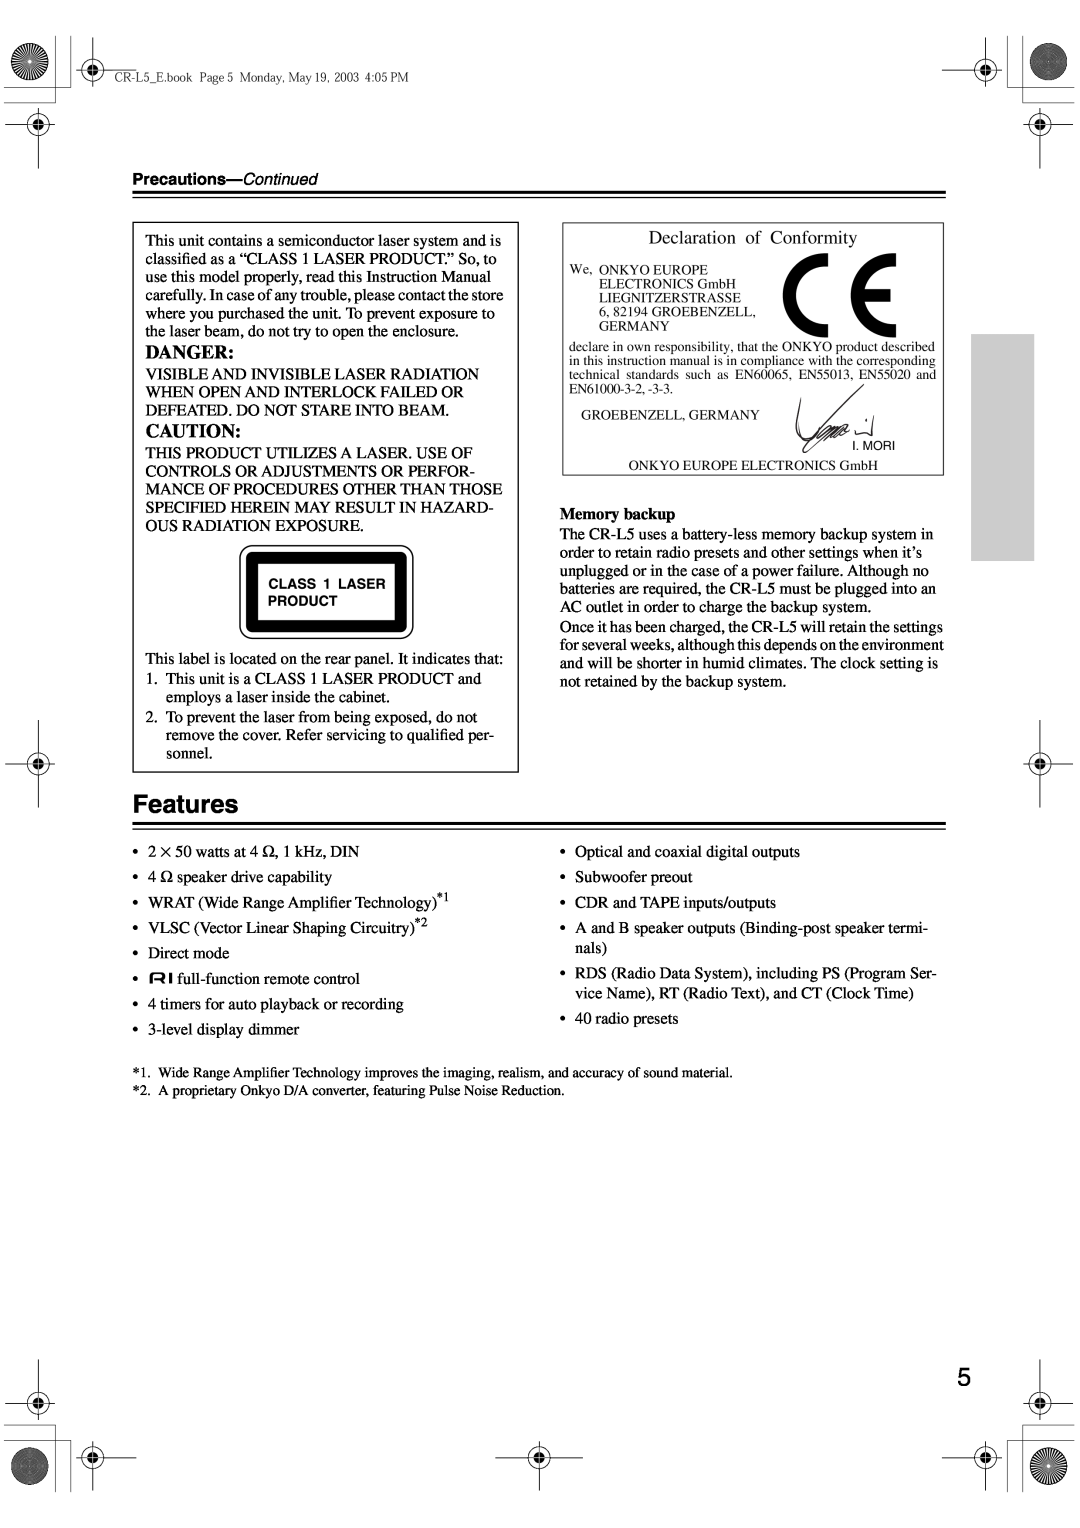 Onkyo CR-L5 instruction manual Features, Danger, Declaration of Conformity, Memory backup 